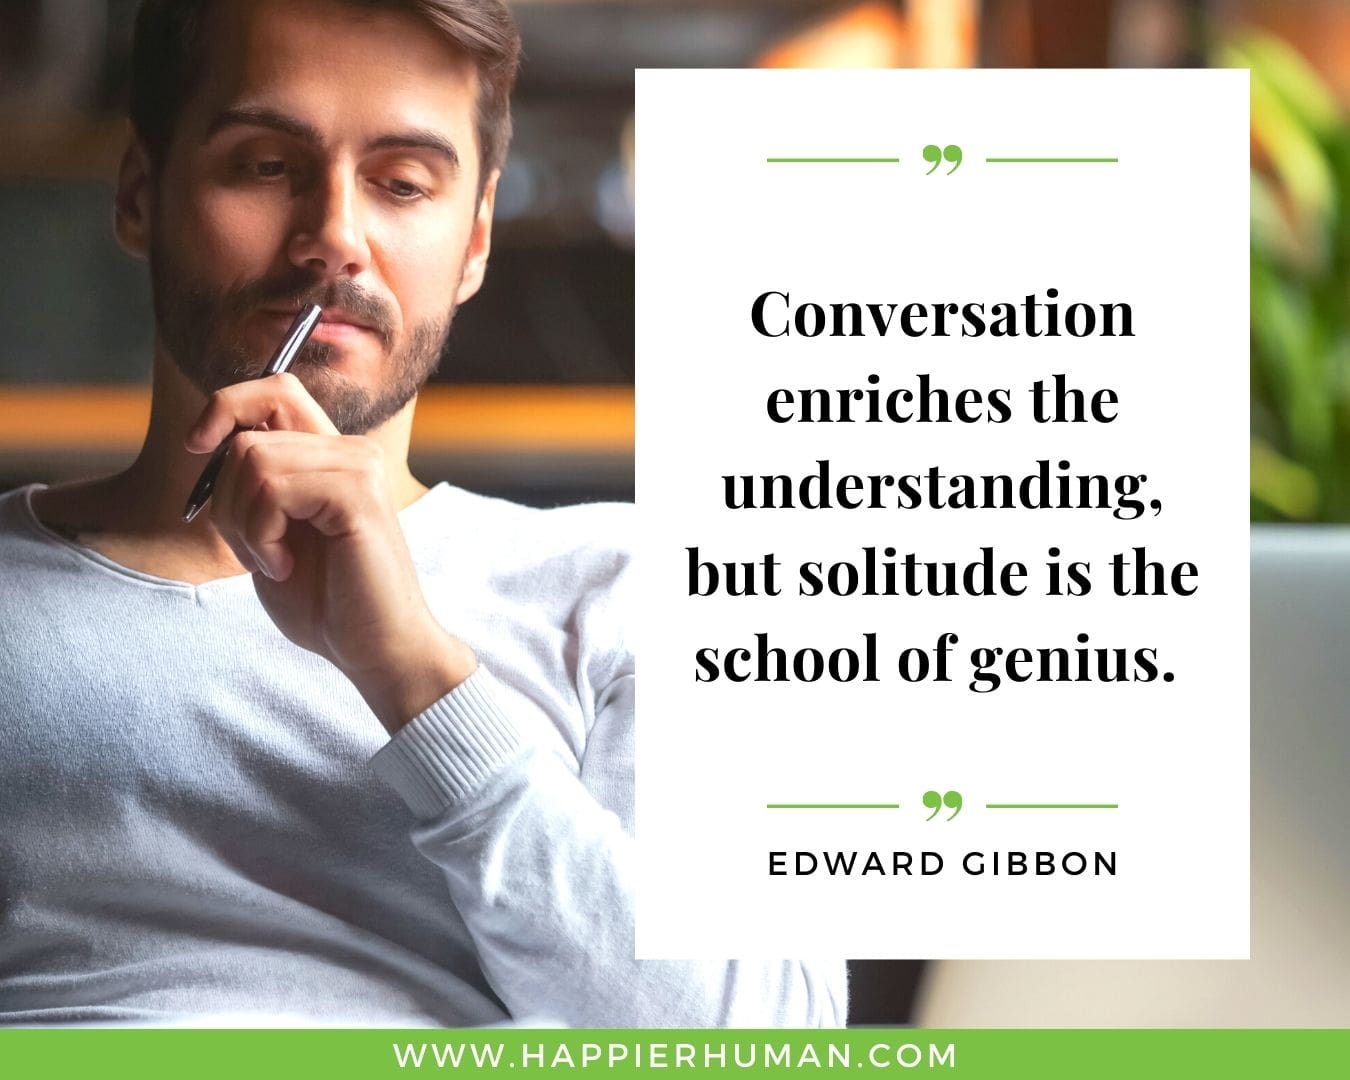 Loneliness Quotes - “Conversation enriches the understanding, but solitude is the school of genius.”– Edward Gibbon